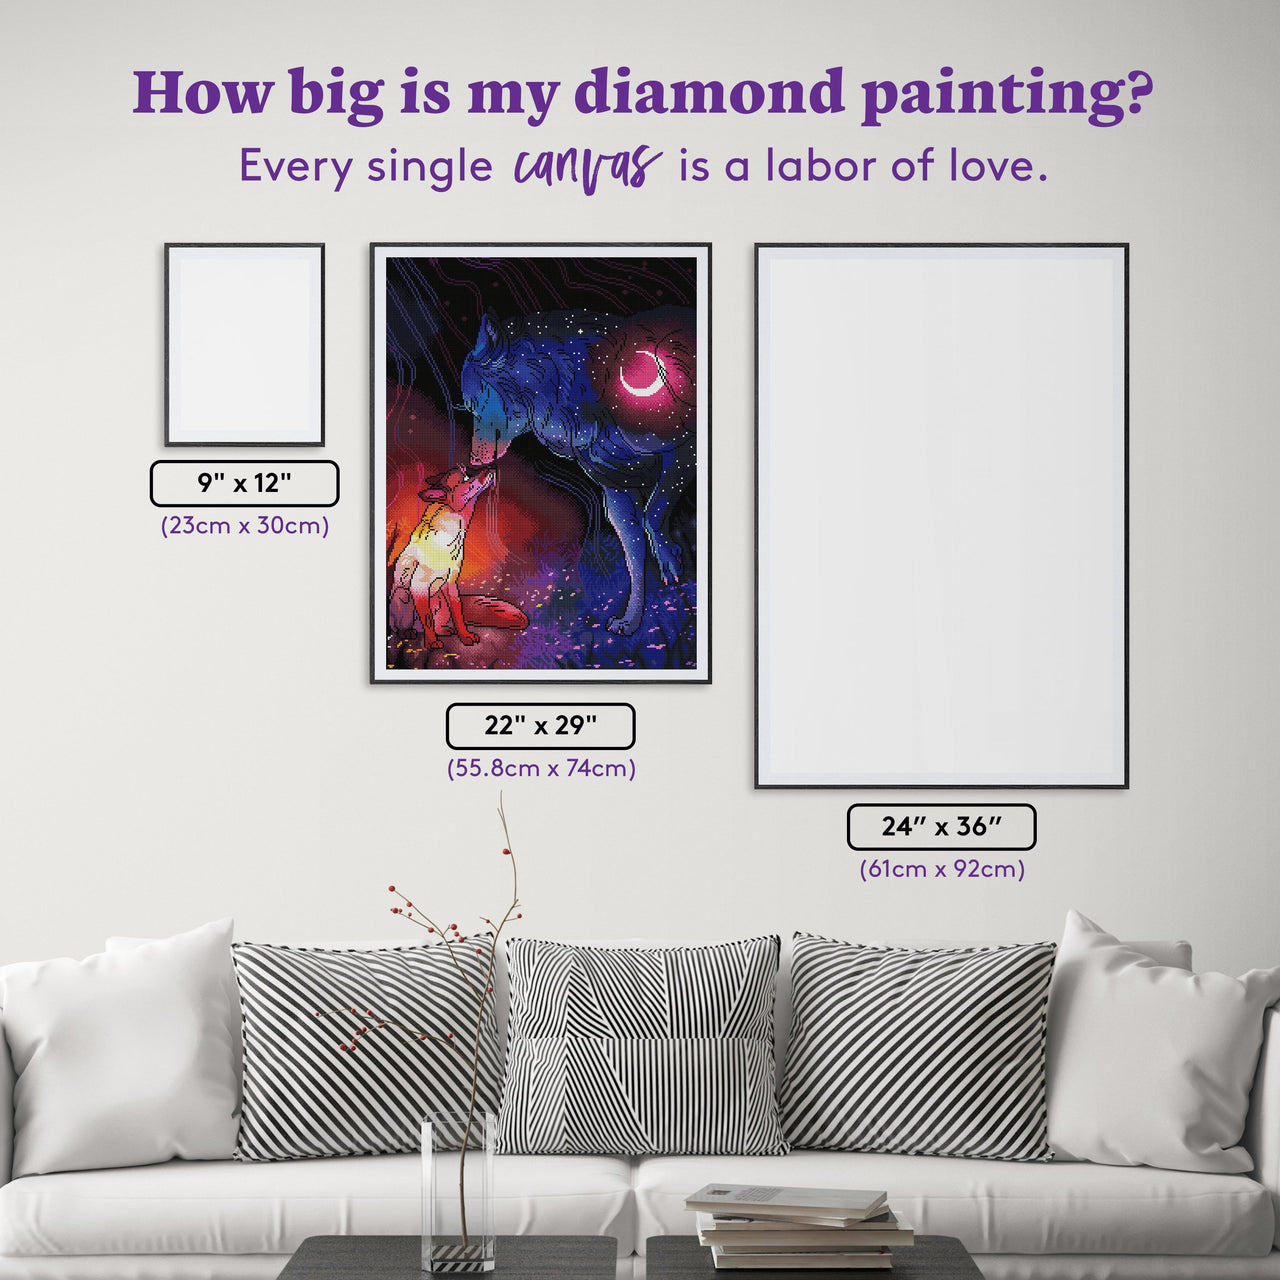 Diamond Painting You Are My Sunshine 22" x 29" (55.8cm x 74cm) / Round With 53 Colors Including 2 ABs, 1 Iridescent Diamond and 1 Fairy Dust Diamond / 52,536